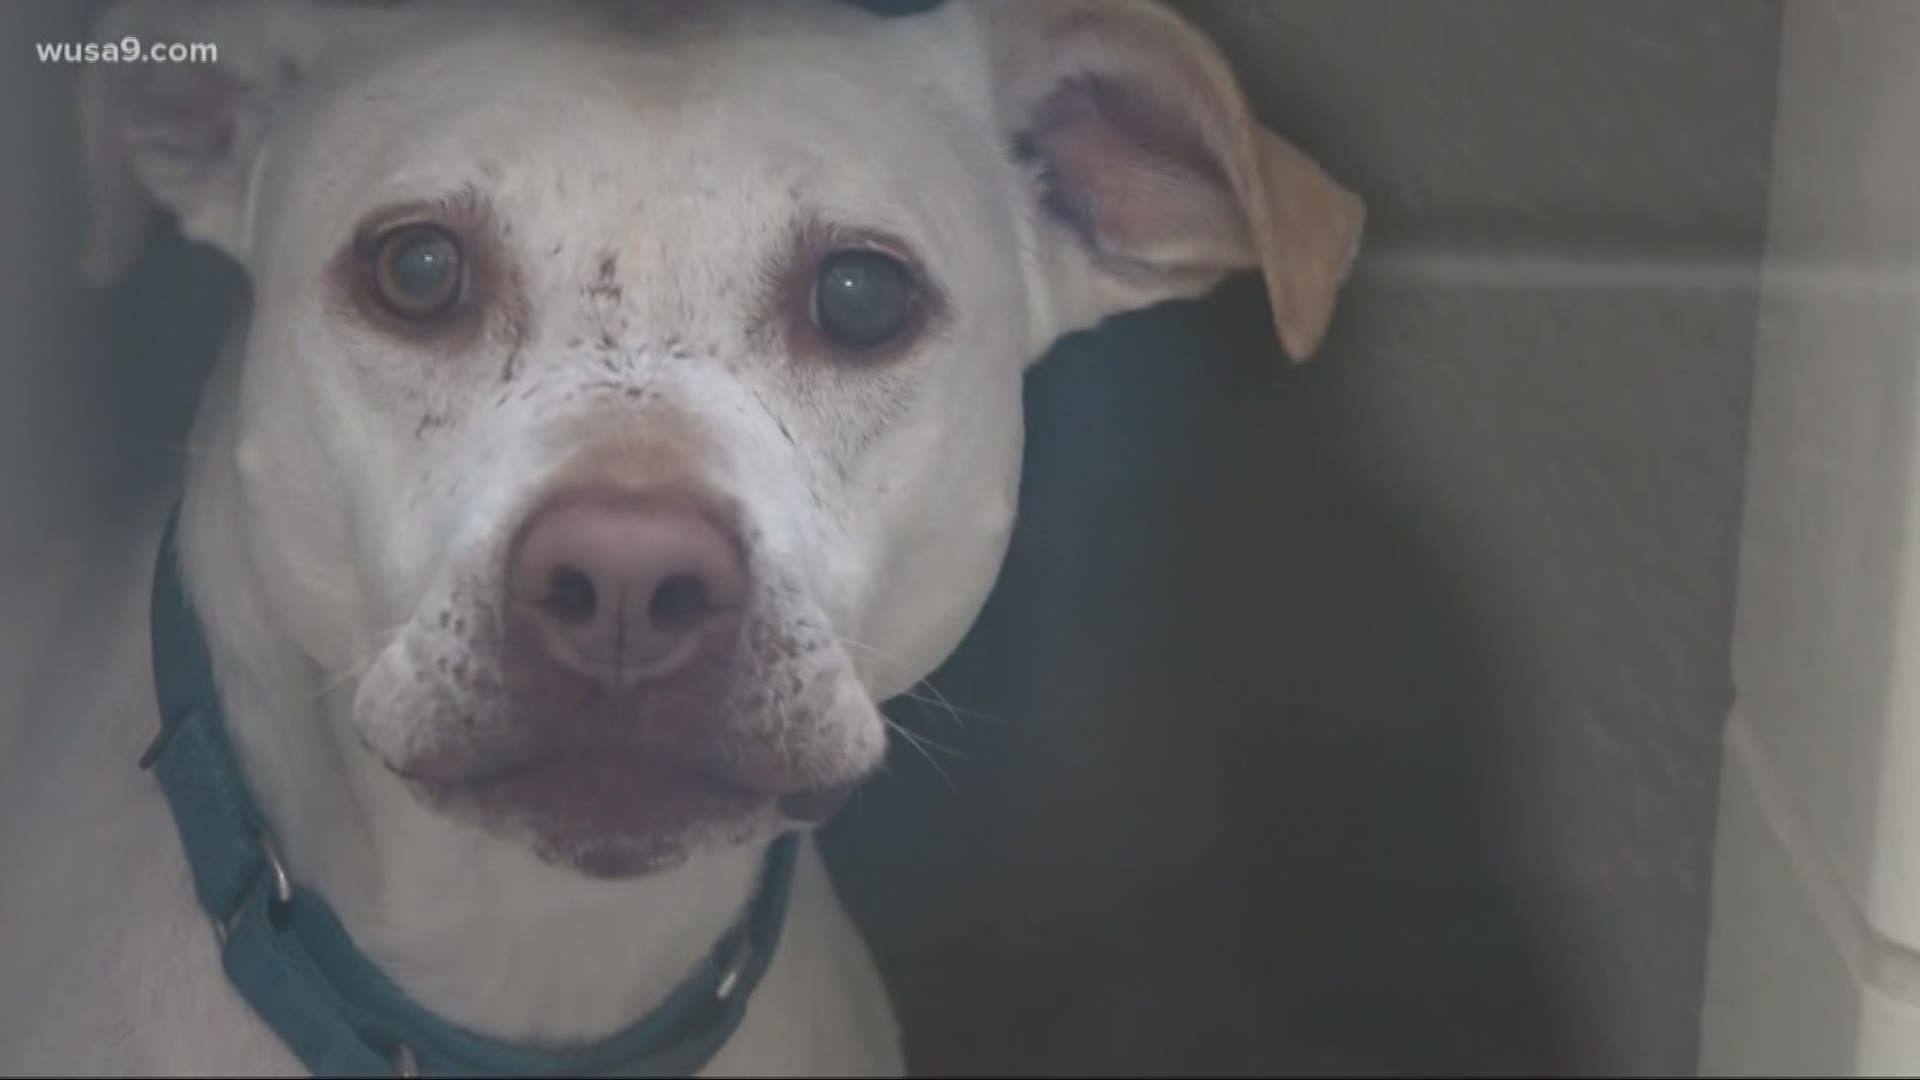 The dogs that have been seized won't be up for adoption because the case hasn't been resolved. But the shelter is trying to make room for them.